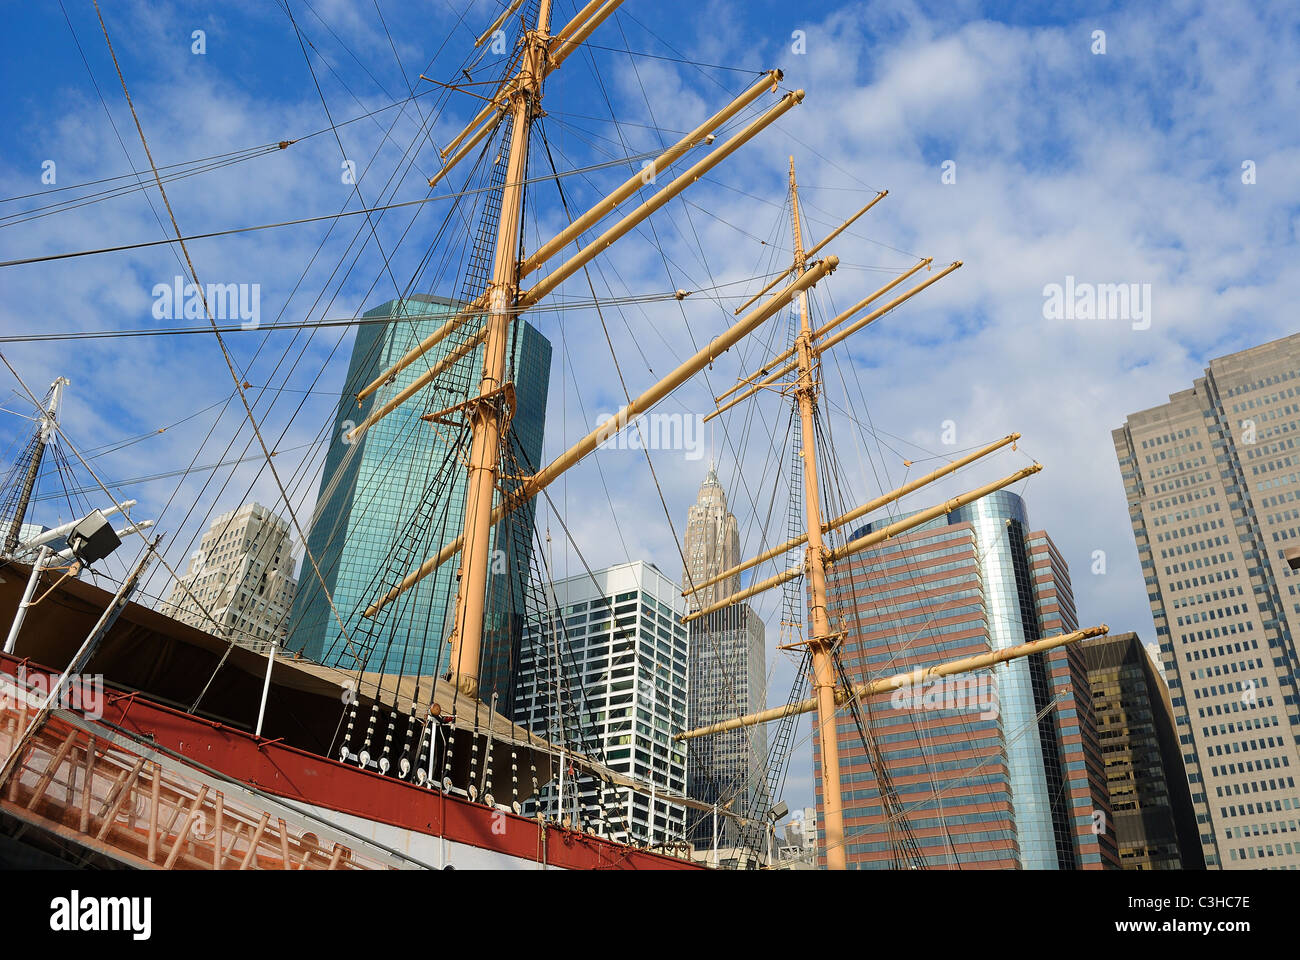 South Street Seaport is a historic port in Lower Manhattan. Stock Photo